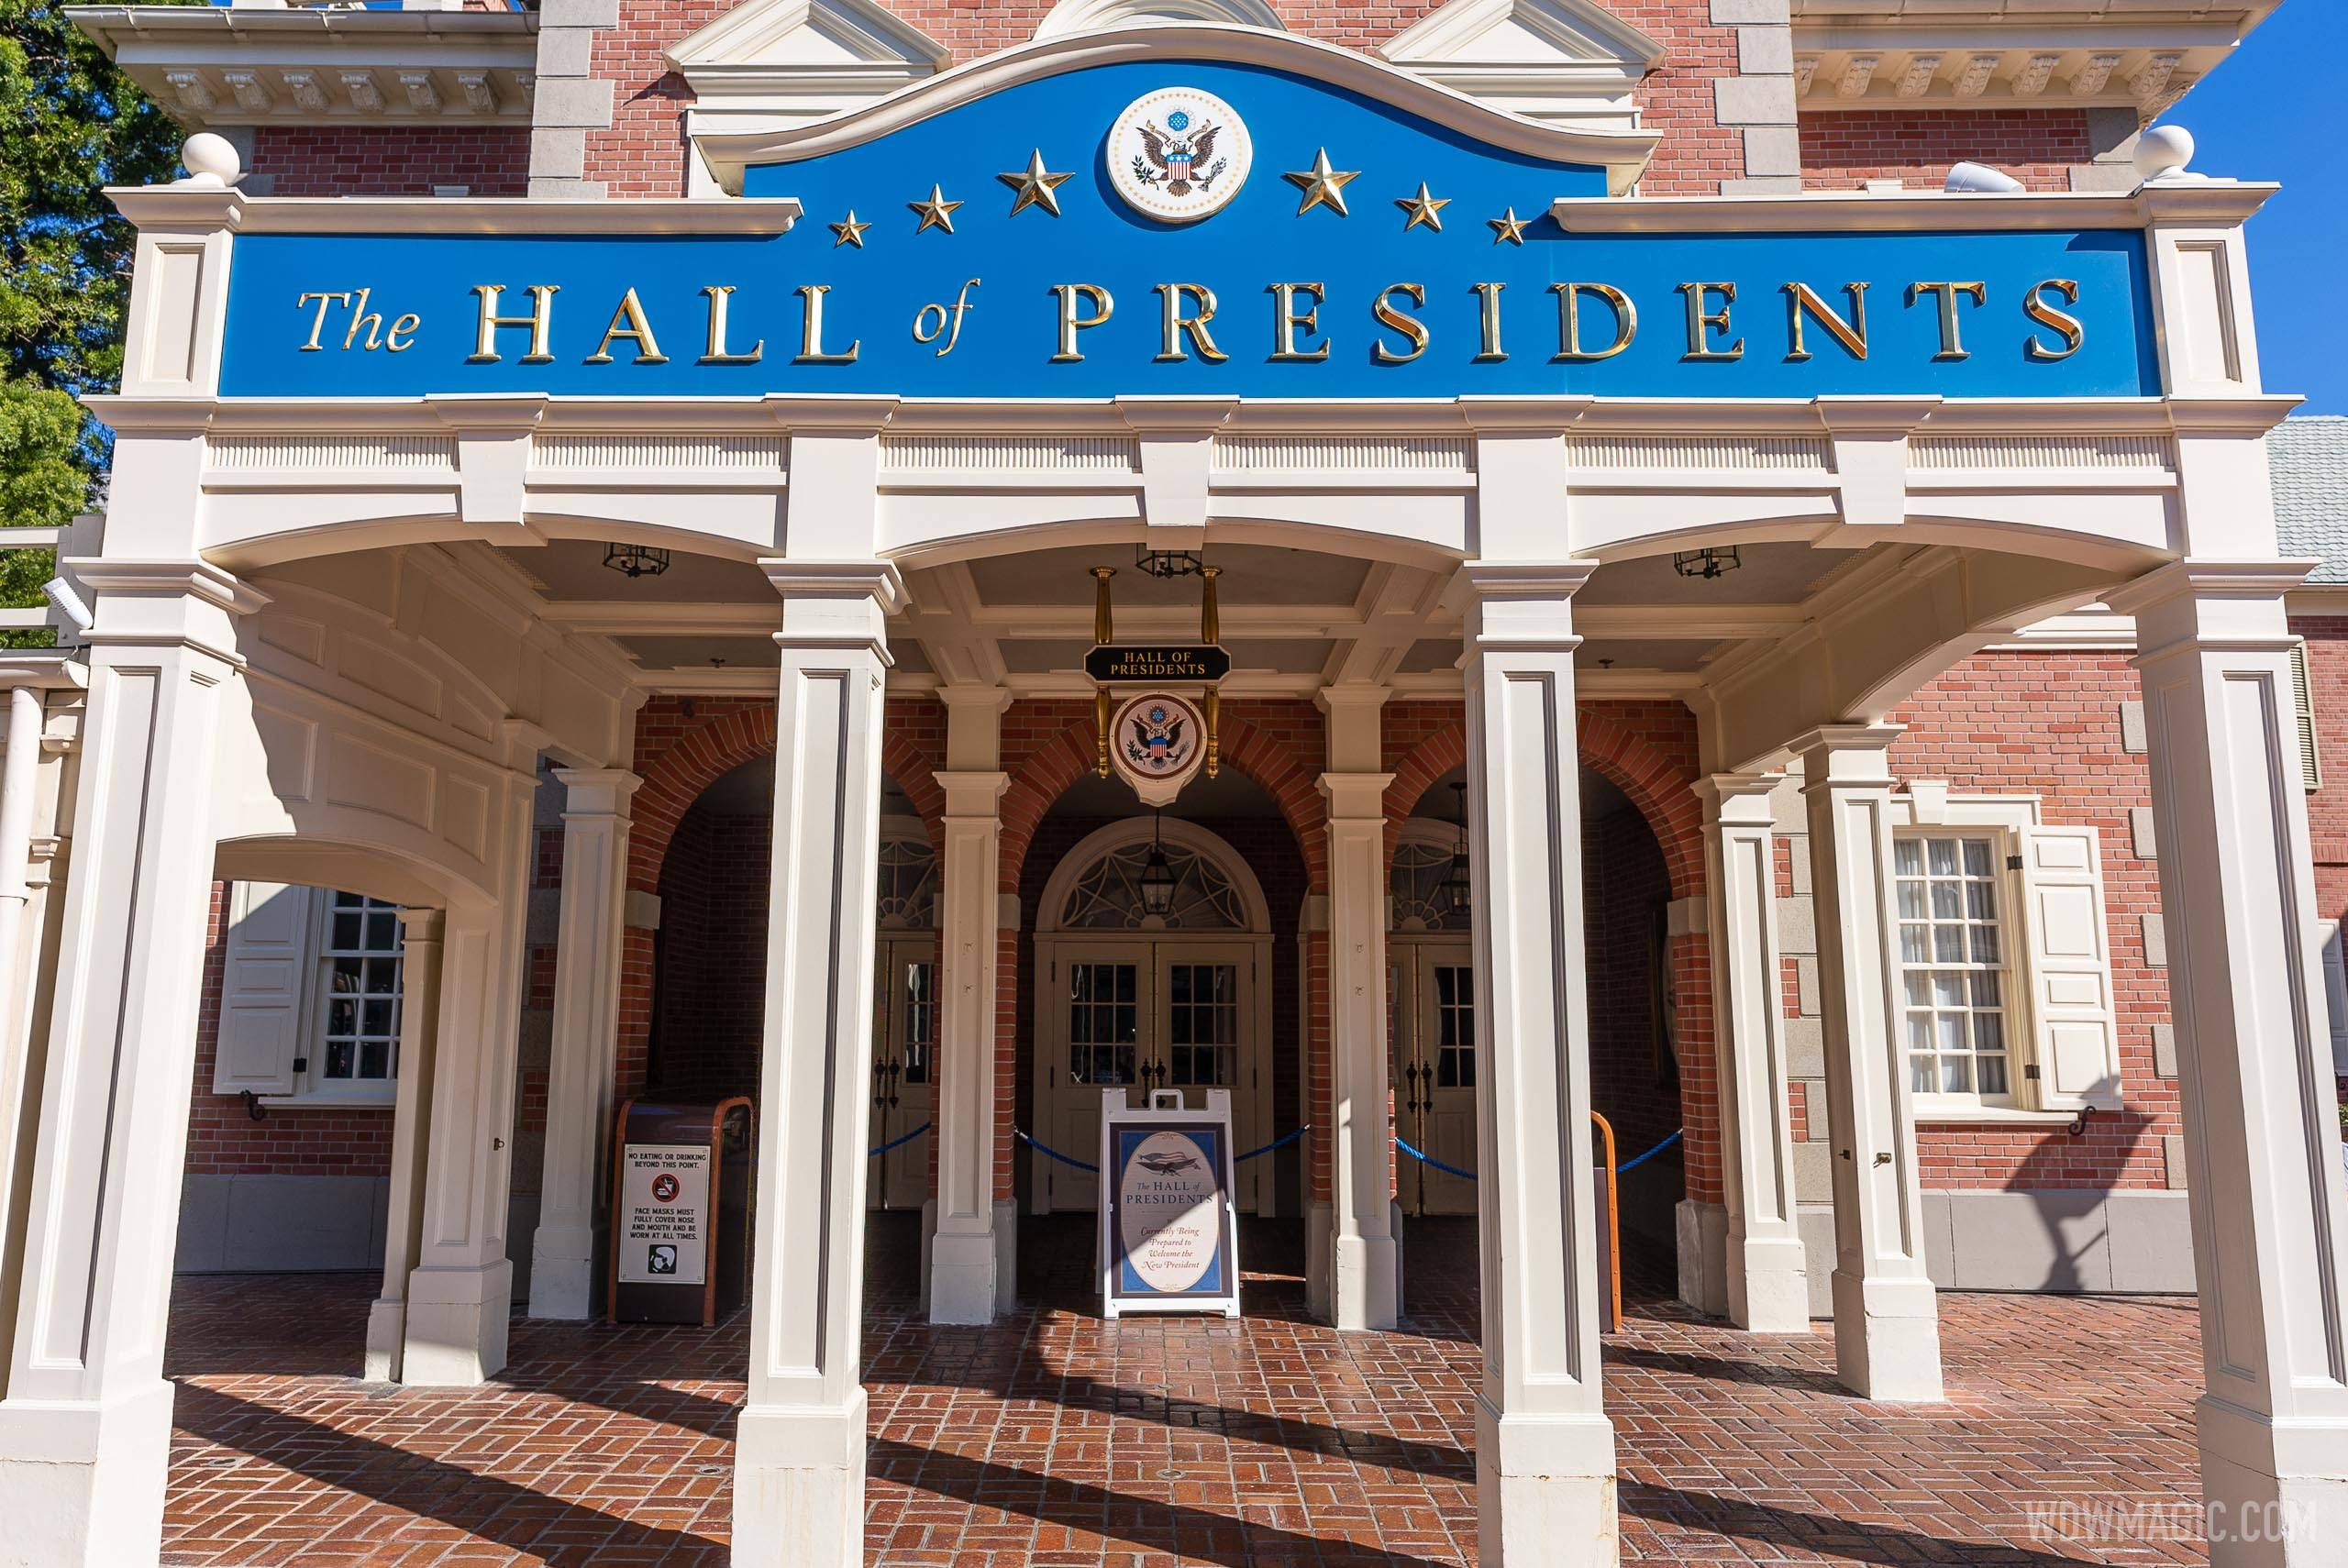 The Hall of Presidents closed for refurbishment - January 2021